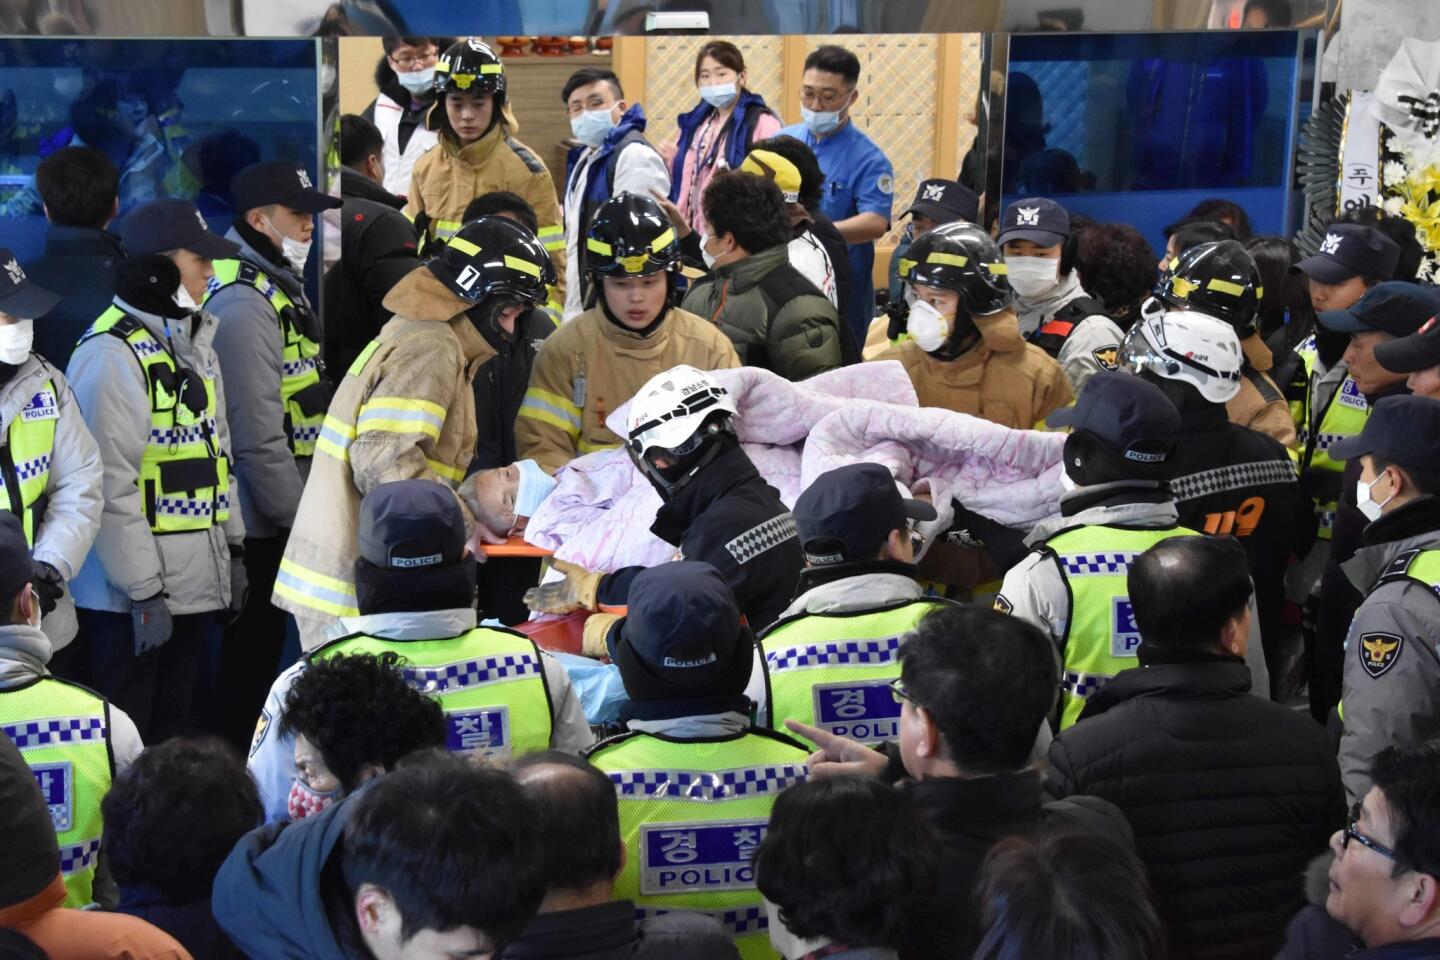 Firefighters carry a victim after the hospital fire in Miryang, South Korea.